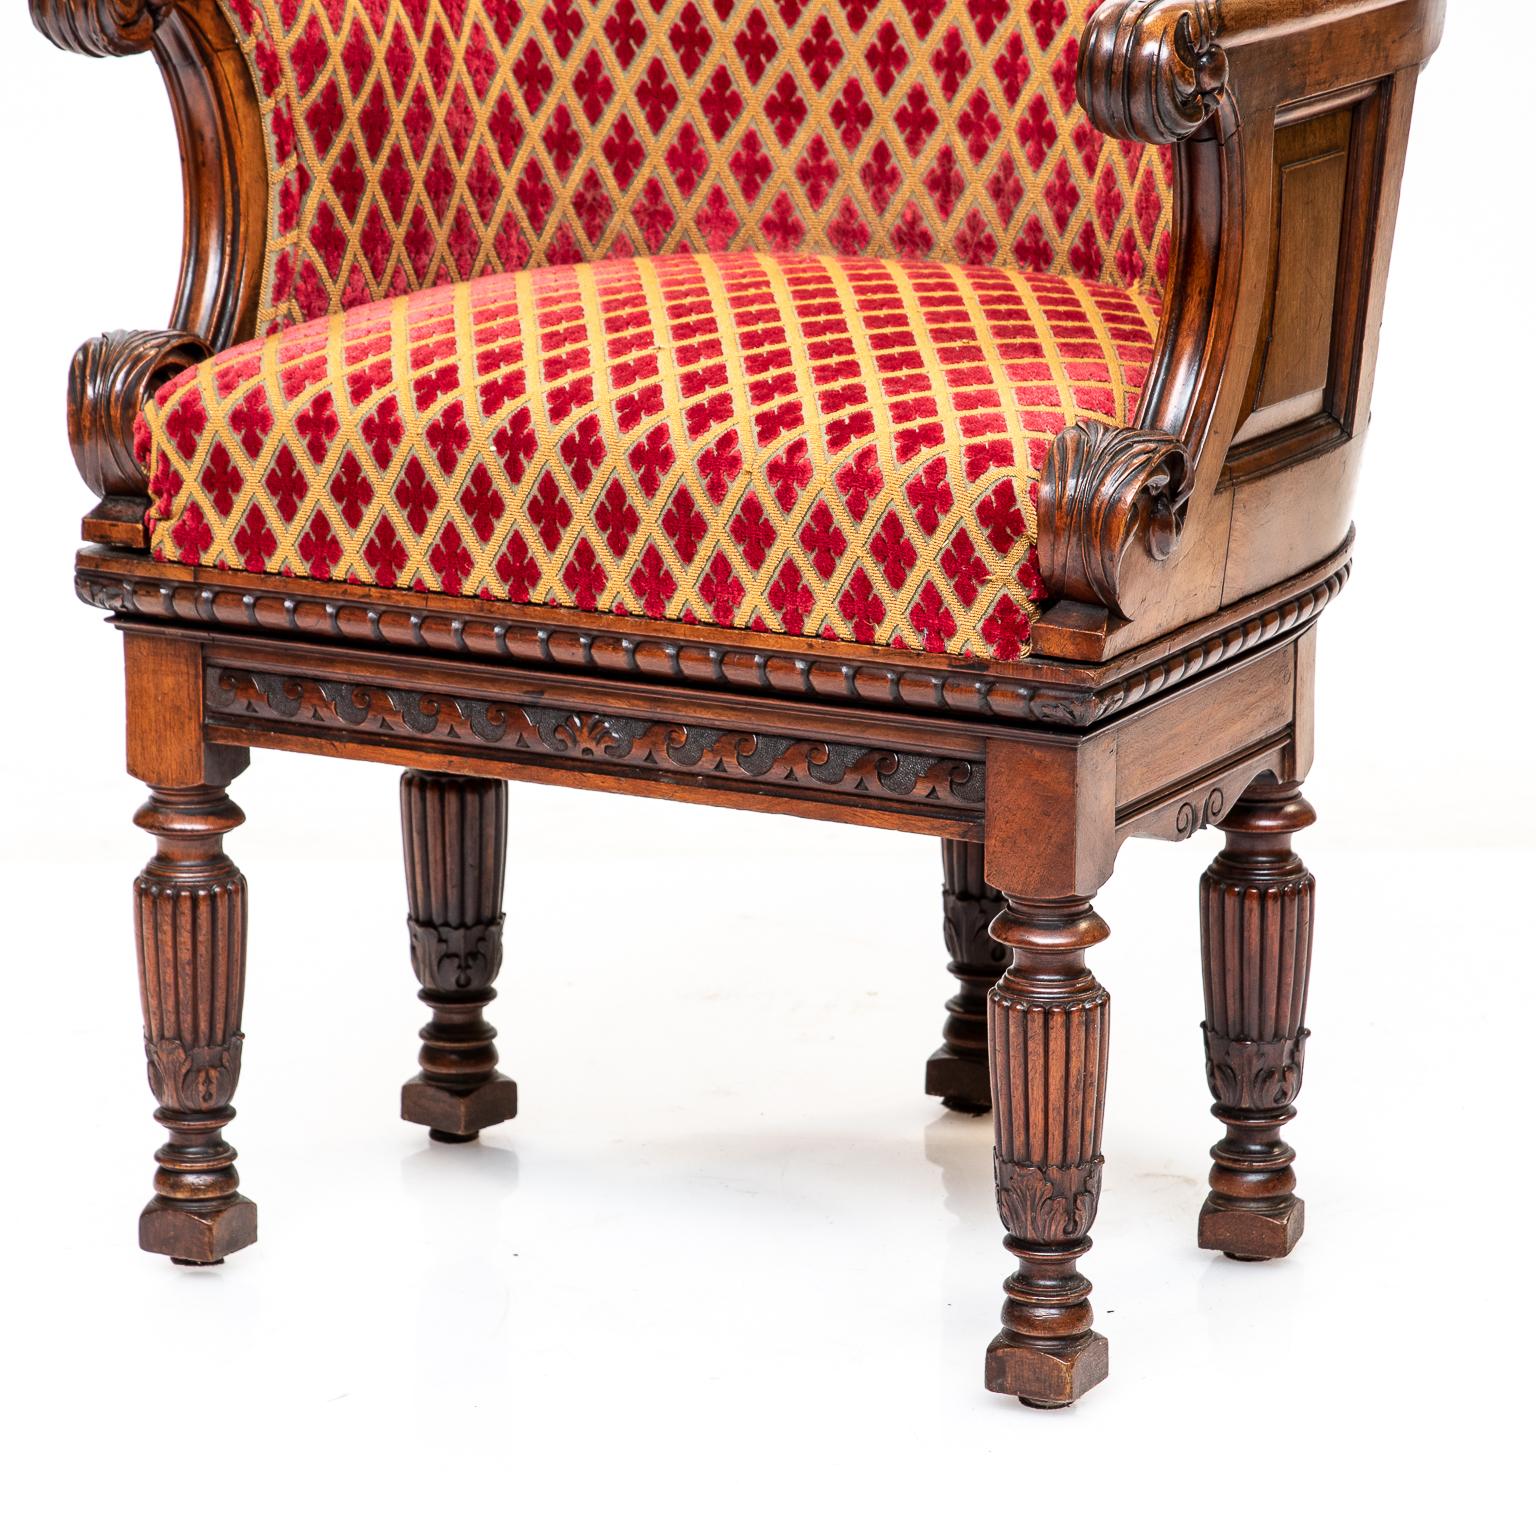 Charles X style walnut barrel back chair. Very nice condition. Nice panelled back, superb carvings, and reeded legs. Upholstery is in very good condition and makes this chair. Very comfortable.